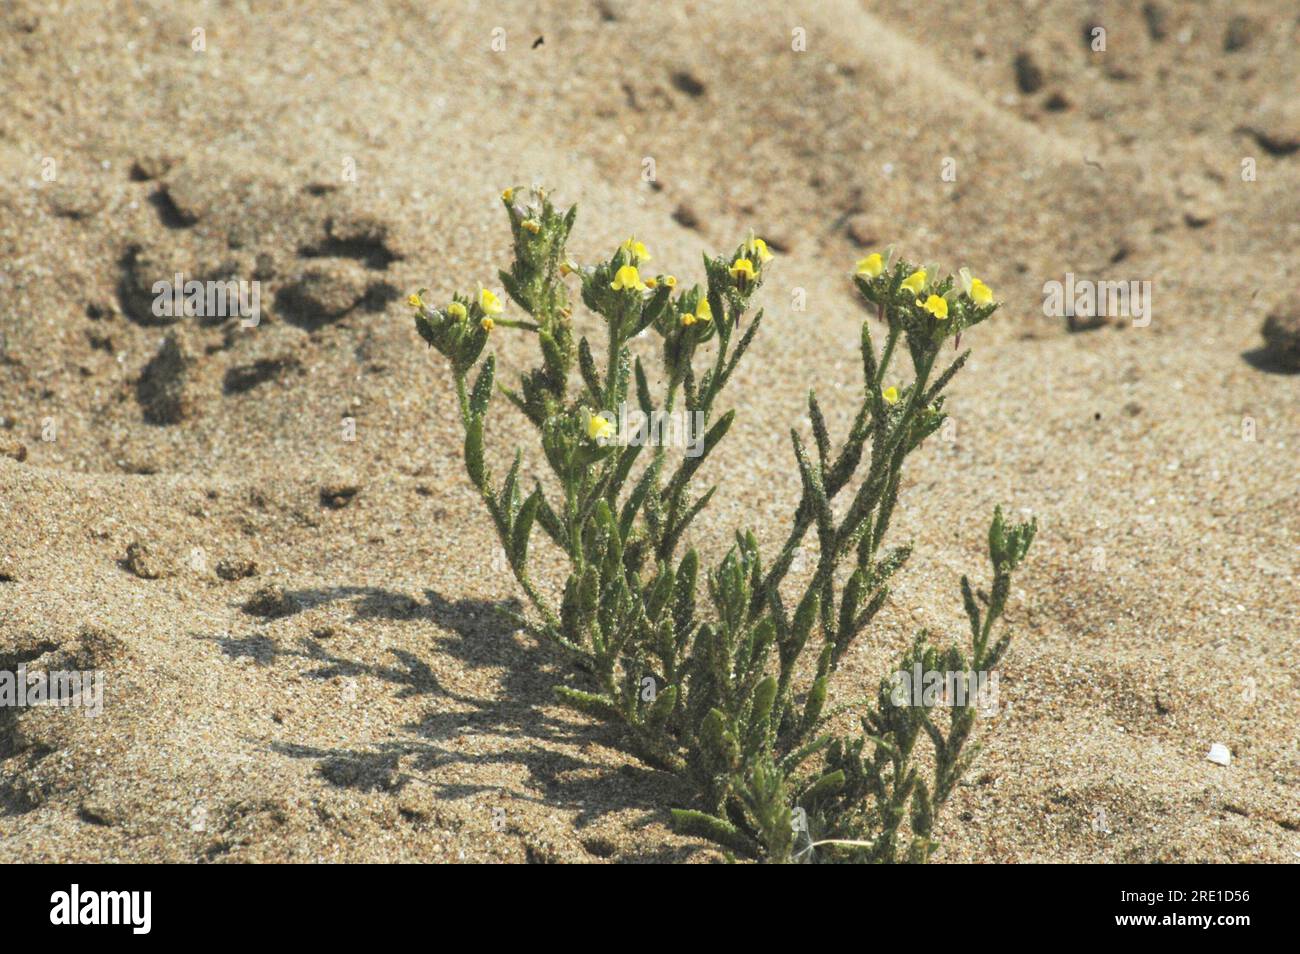 Sand Toadflax,'Linaria arenaria', Short, Sticky haired, Yellow flowered,Rare.Found in Sand dunes. Coastal habitat. May till September. Braunton. UK Stock Photo